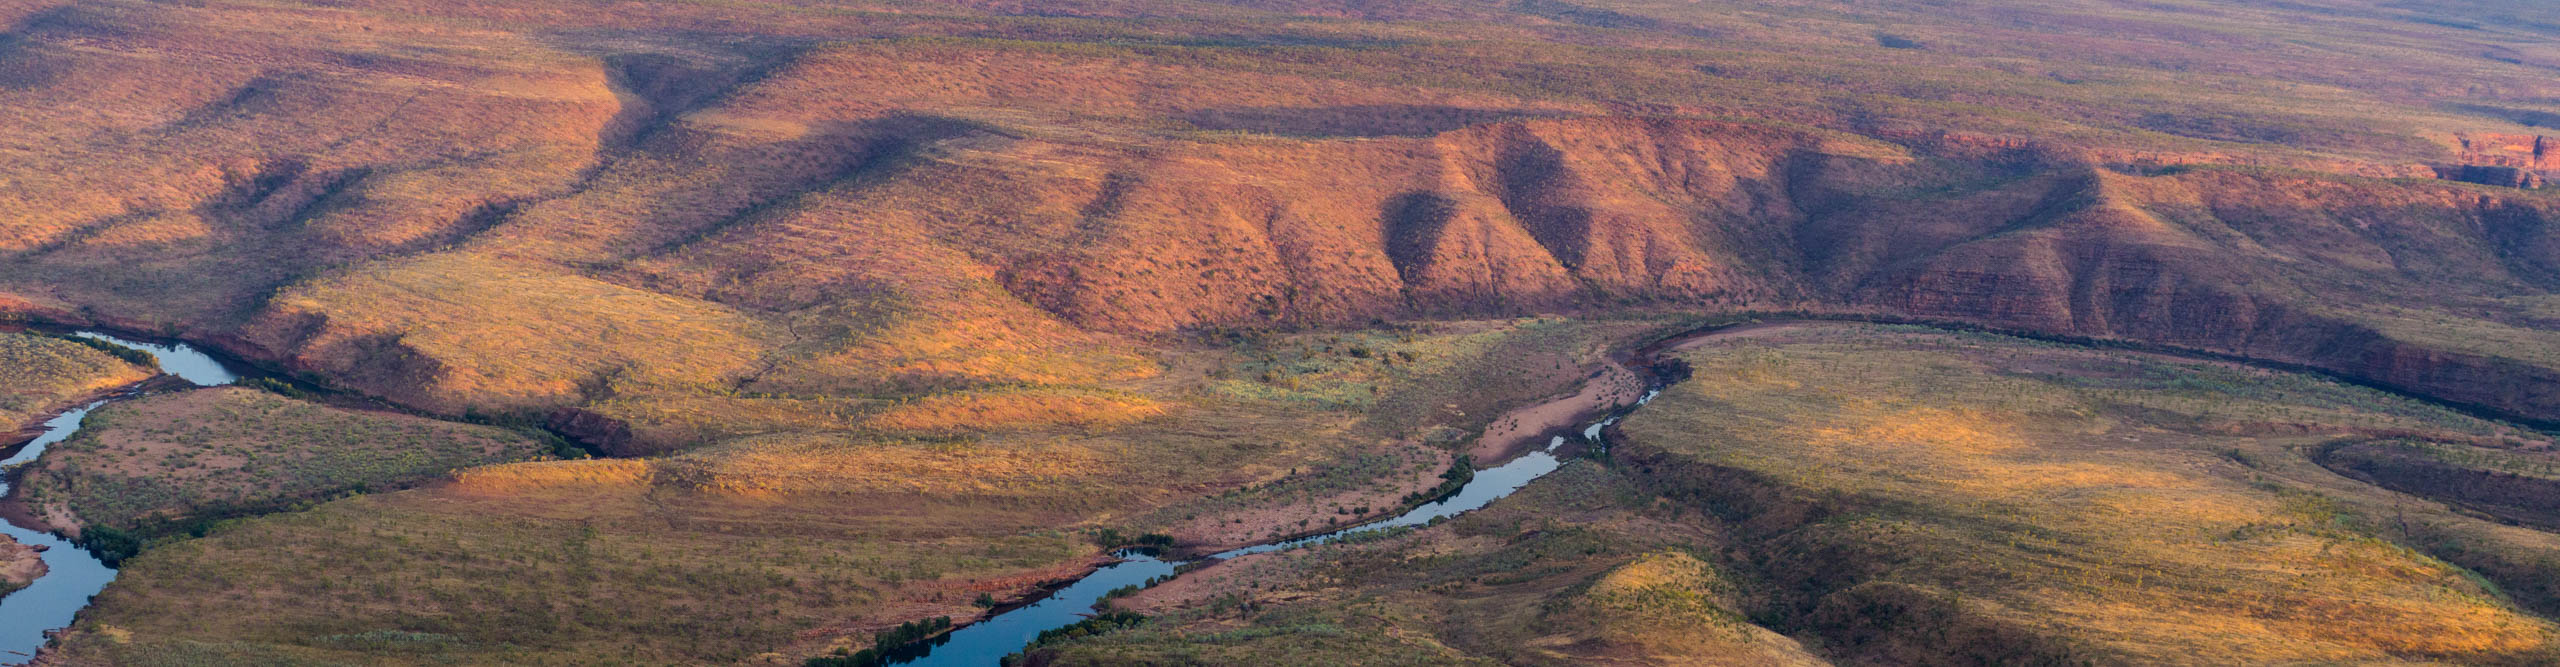  Aerial view of the Kimberleys and the El Questro river at sunset, Western Australia 